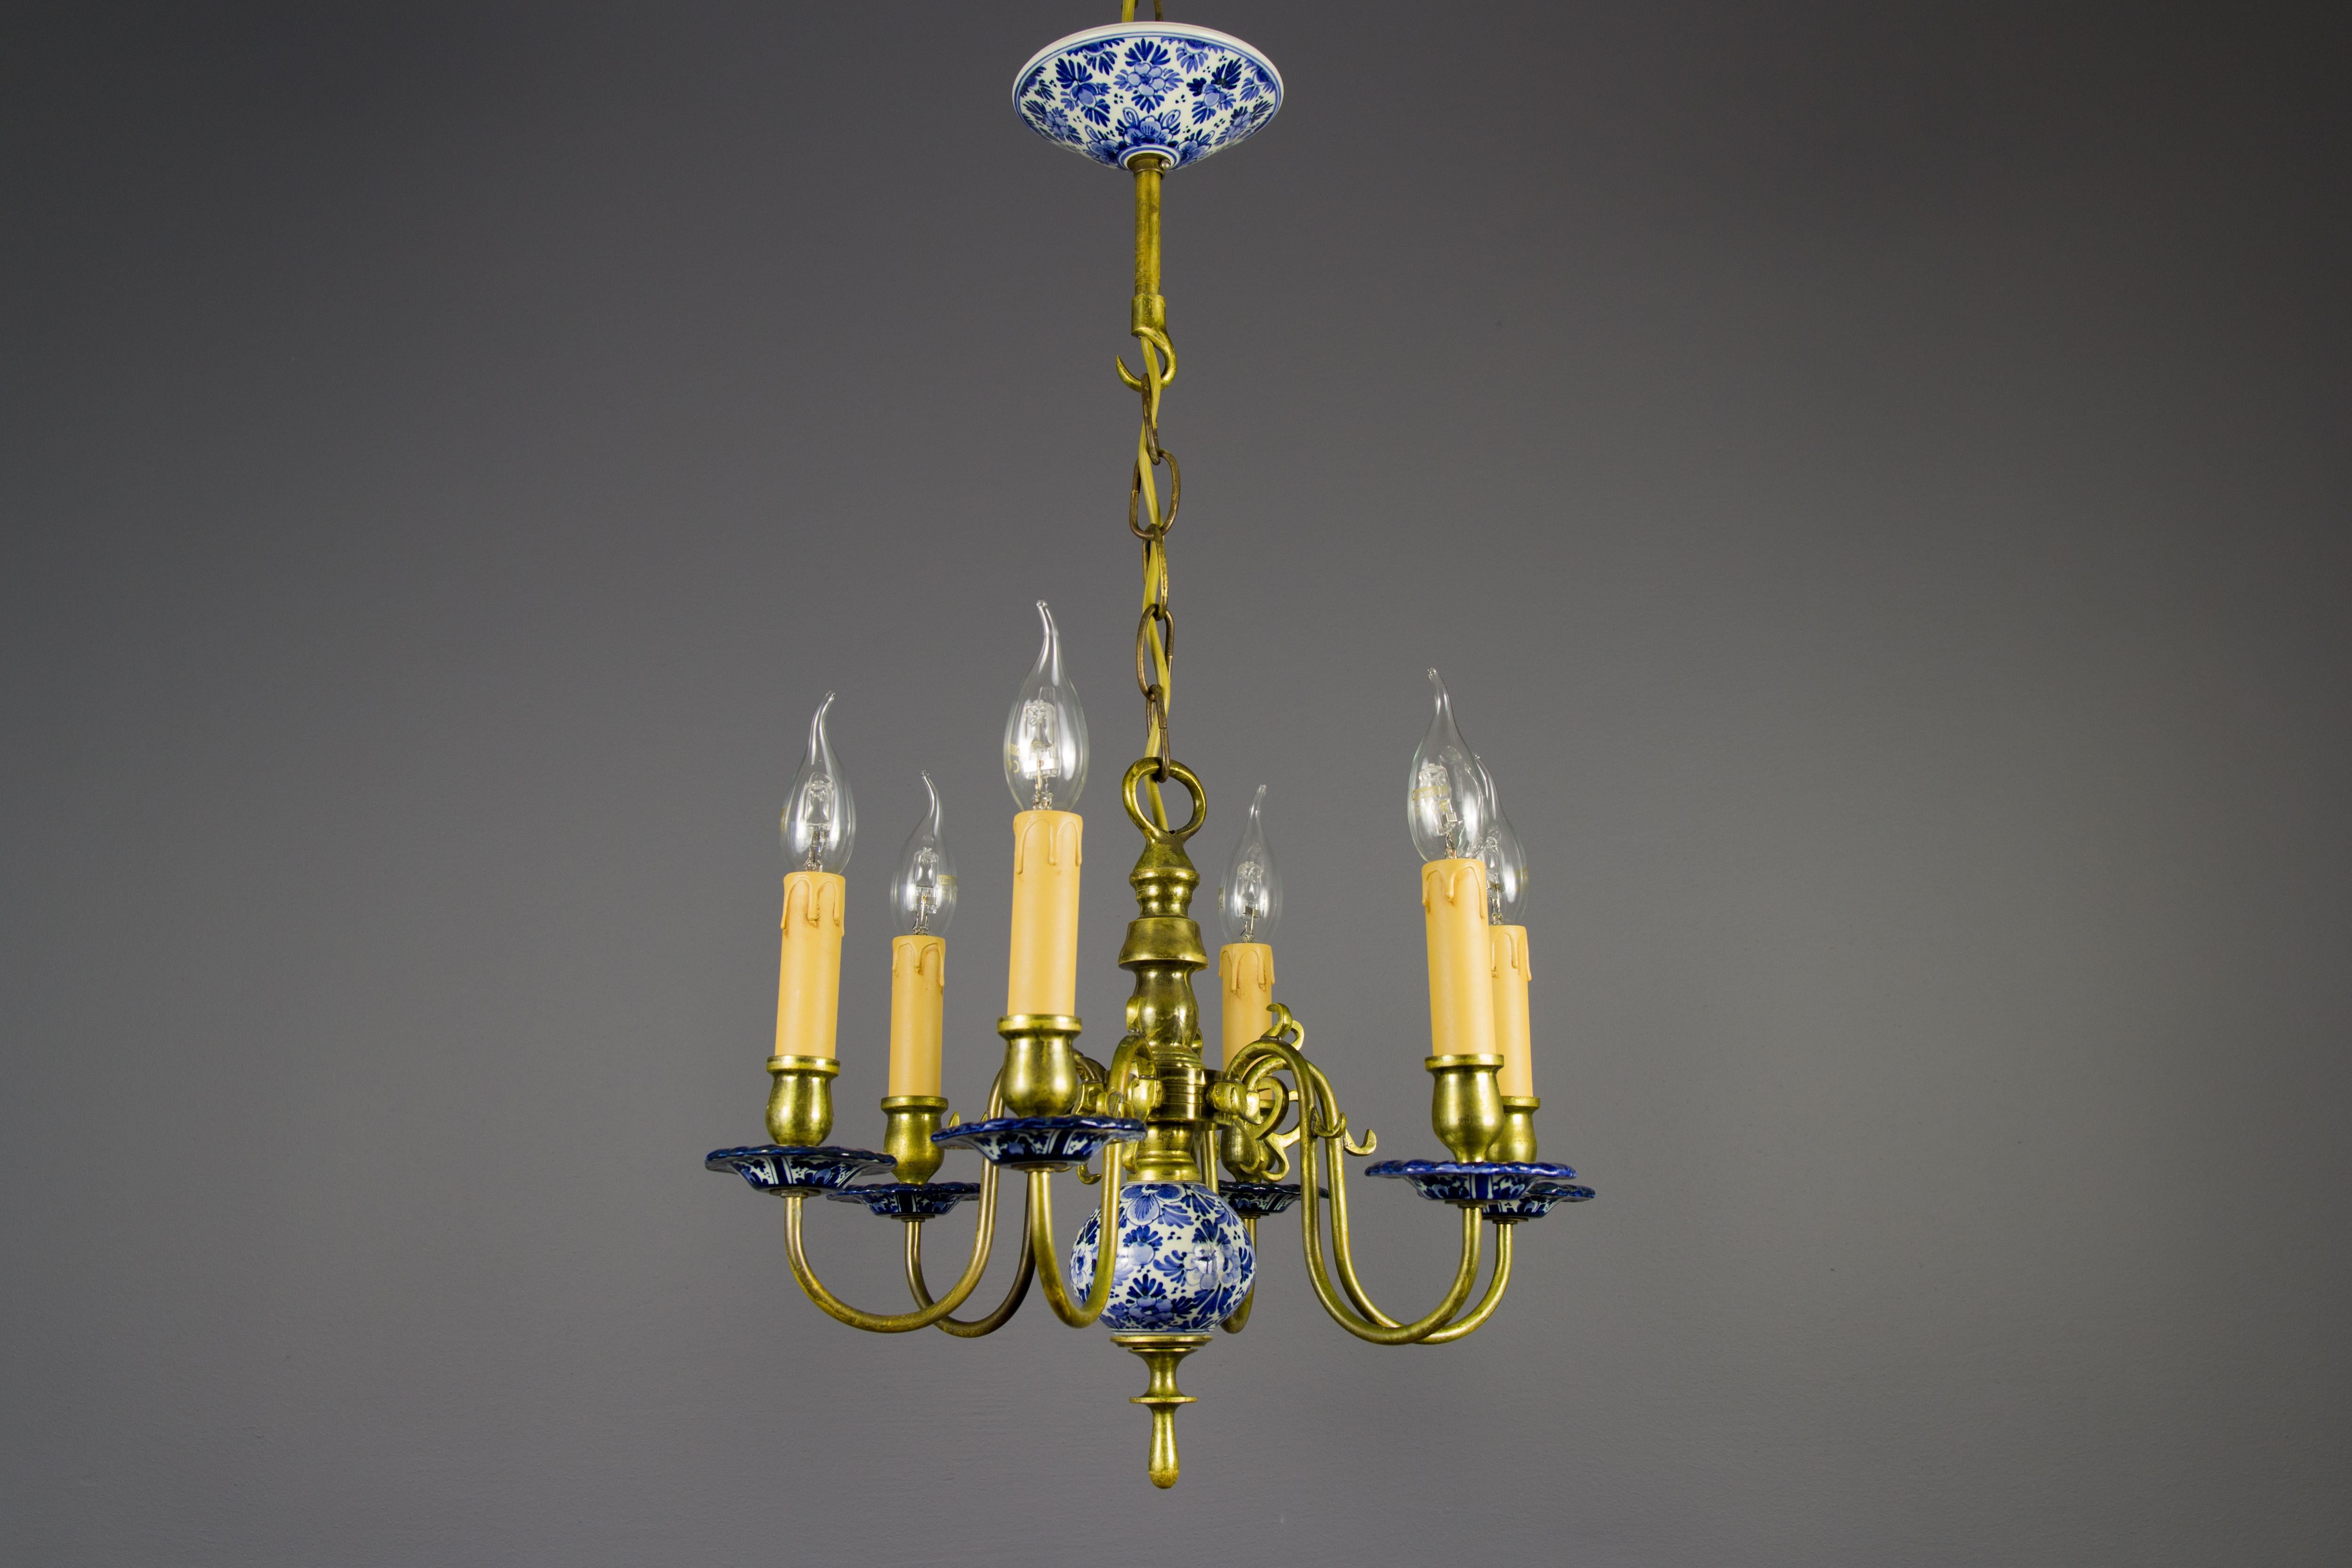 Elegant brass and blue and white Delft porcelain chandelier. Six brass arms with sockets for E14 size light bulbs. The inside of the canopy is marked with the D. P. Delft.
Dimensions: Diameter 45 cm / 17.71 in, height 70 cm / 27.55 in.
 